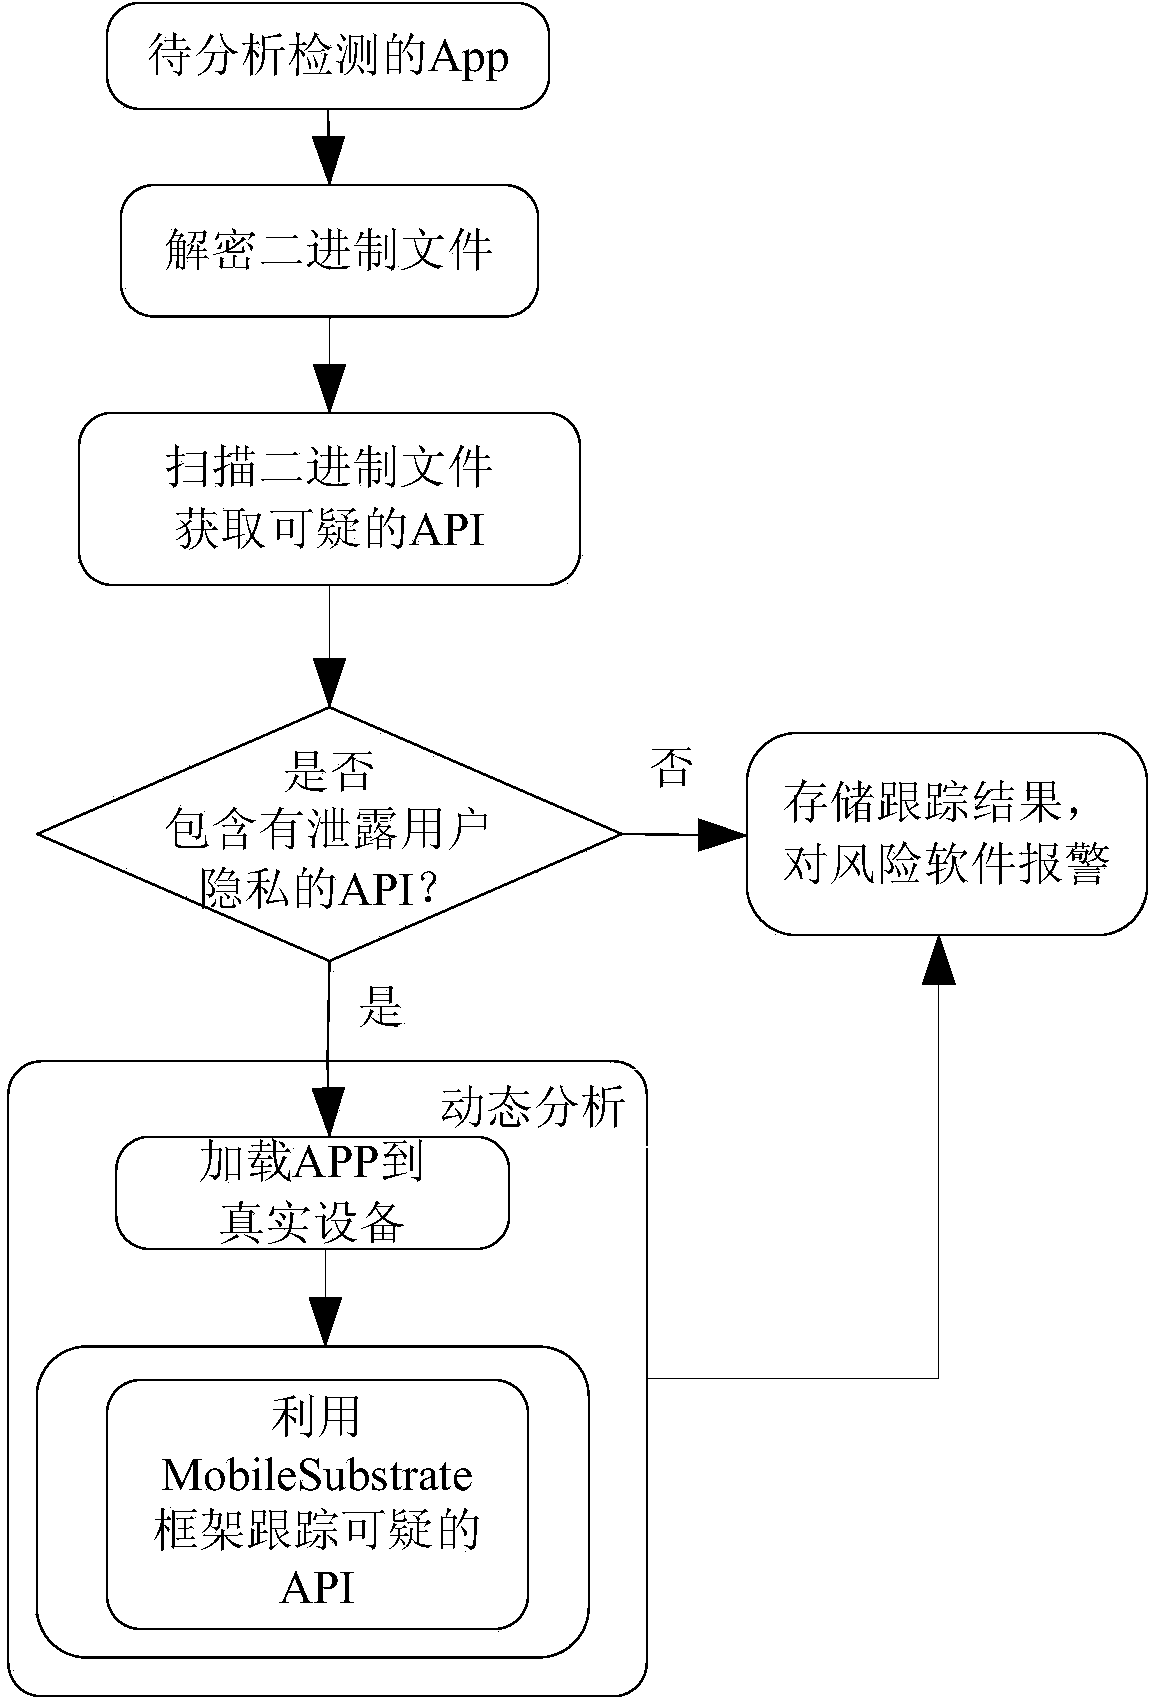 Monitoring device and method for protecting user privacy based on iPhone operating system (iOS)